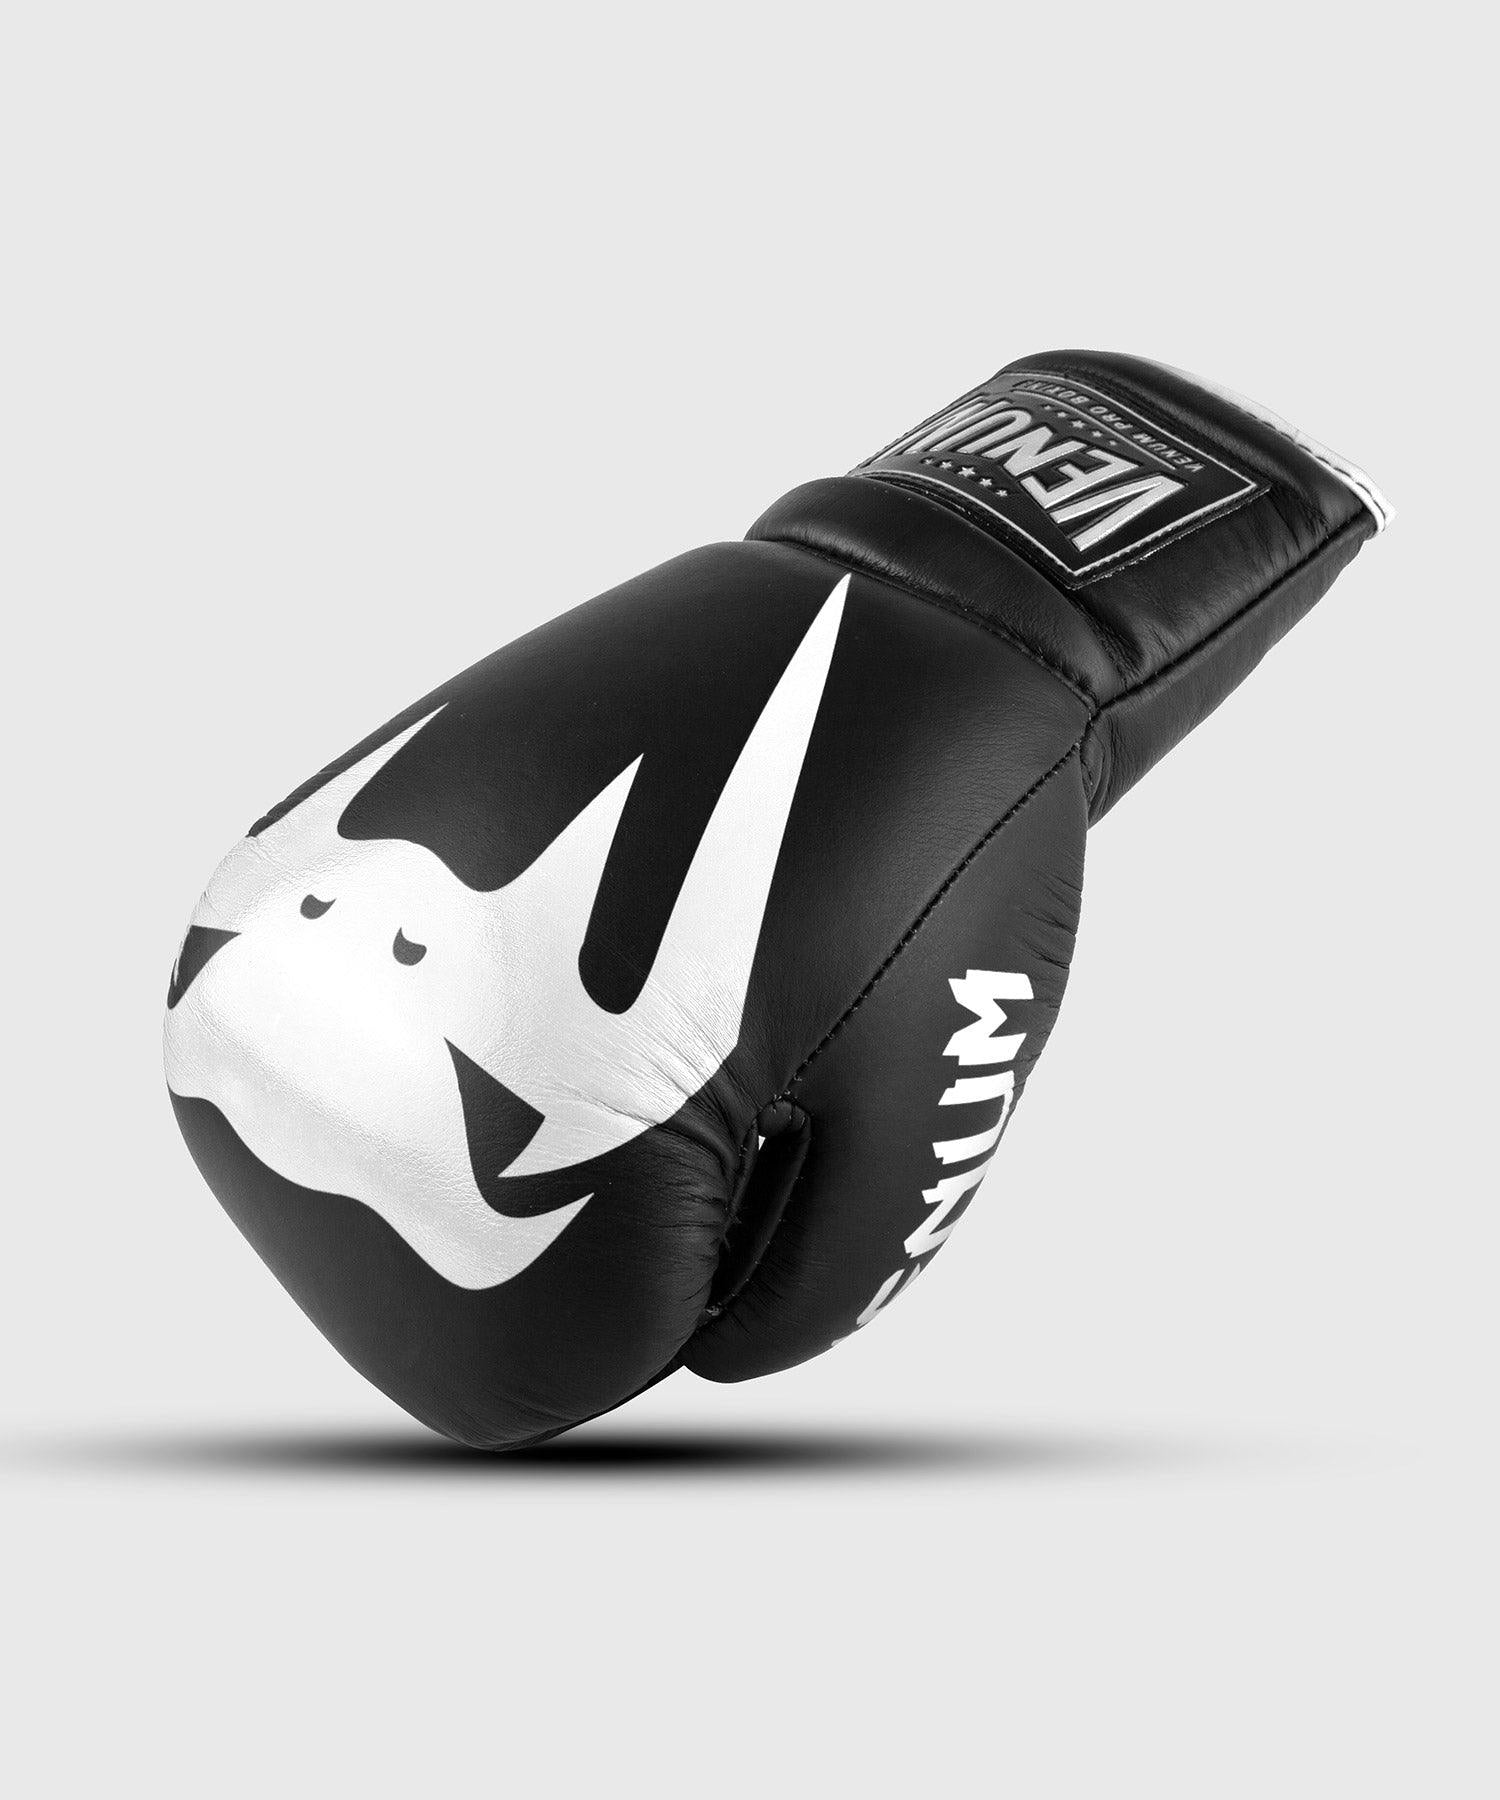 Venum Giant 2.0 Pro Boxing Gloves - With Laces - Black/White Picture 1